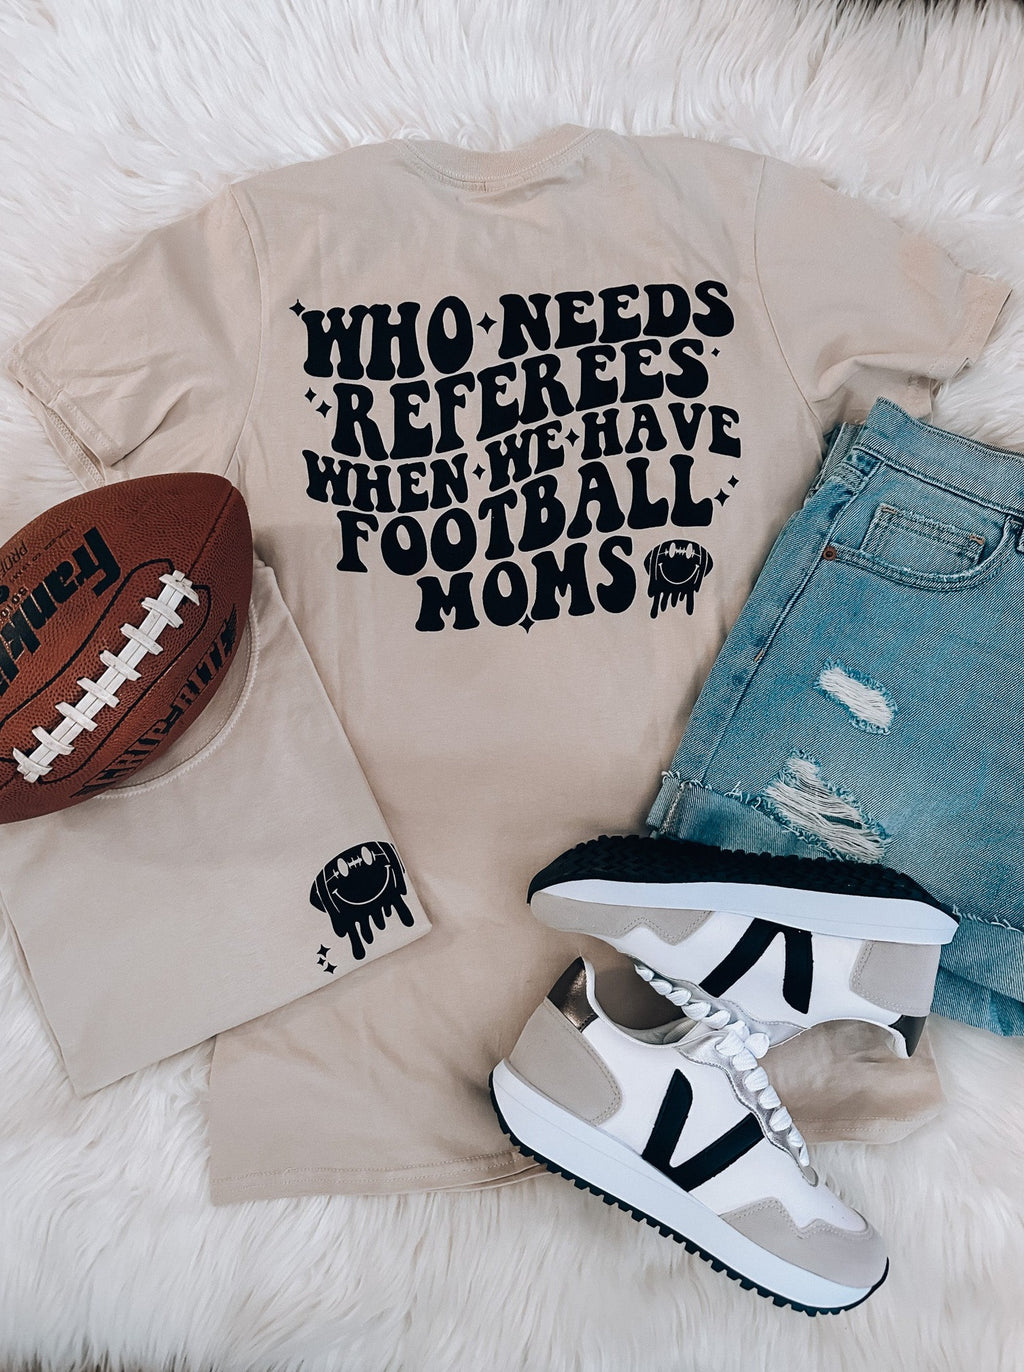 We Have Football Moms Graphic Tee (S-XL)